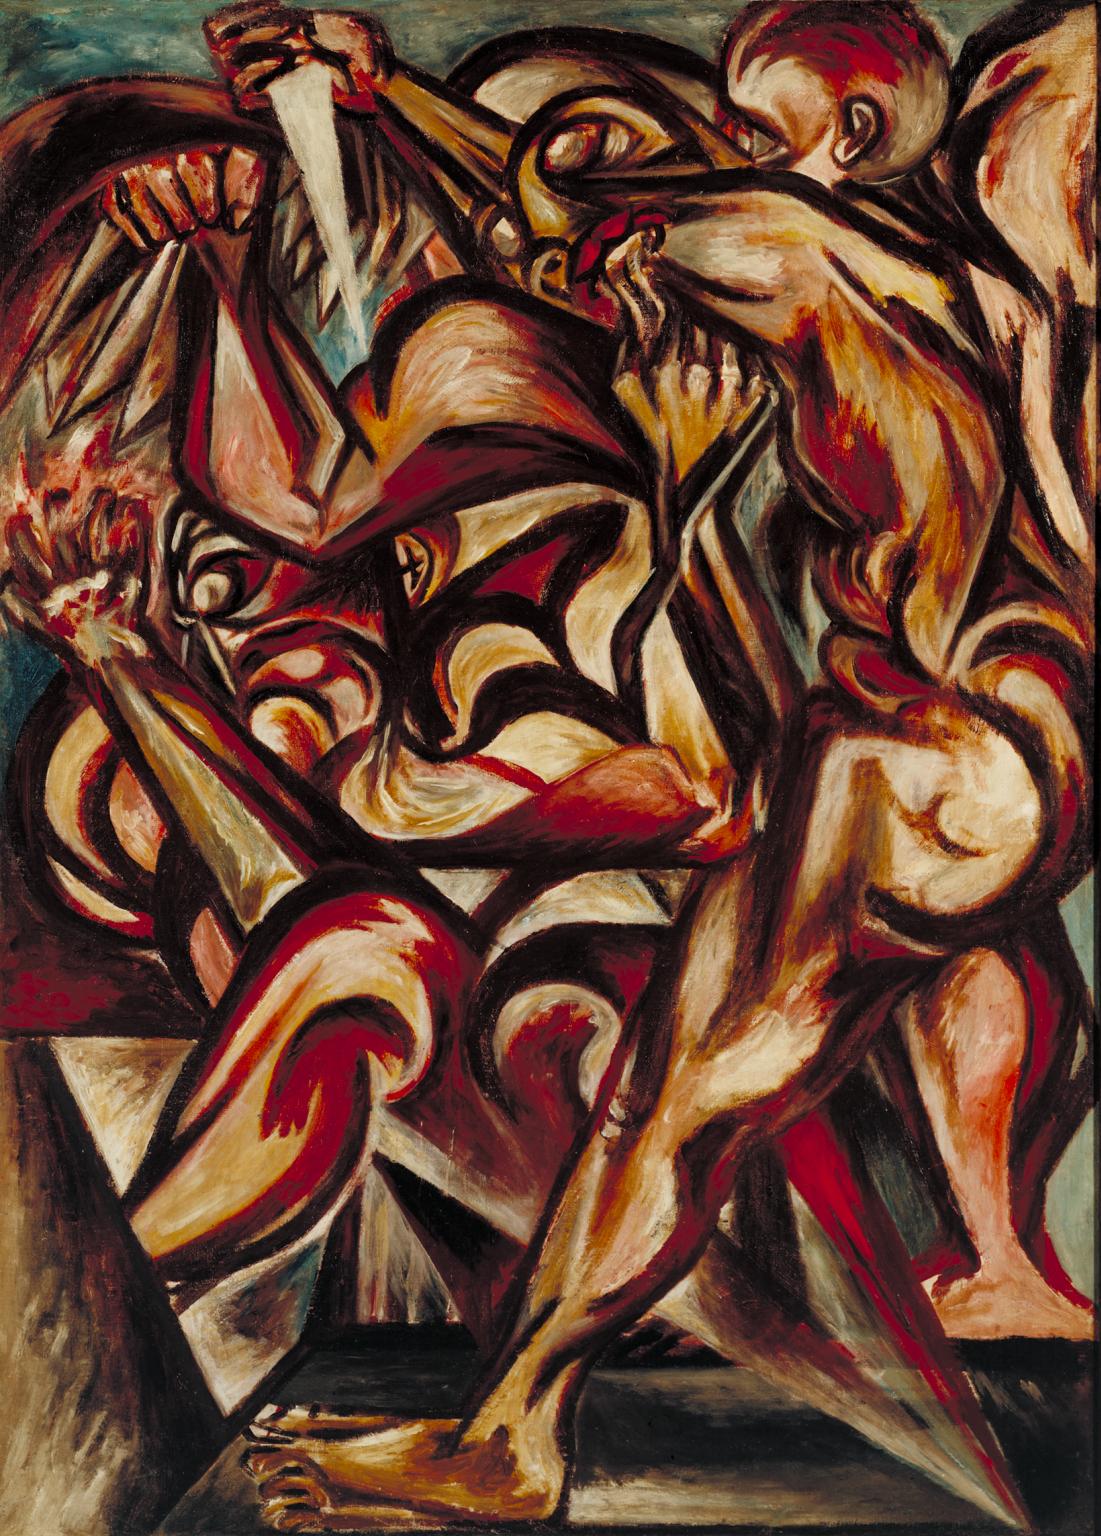 Jackson Pollock, Naked Man with Knife, c.1938–40 (Tate Gallery)